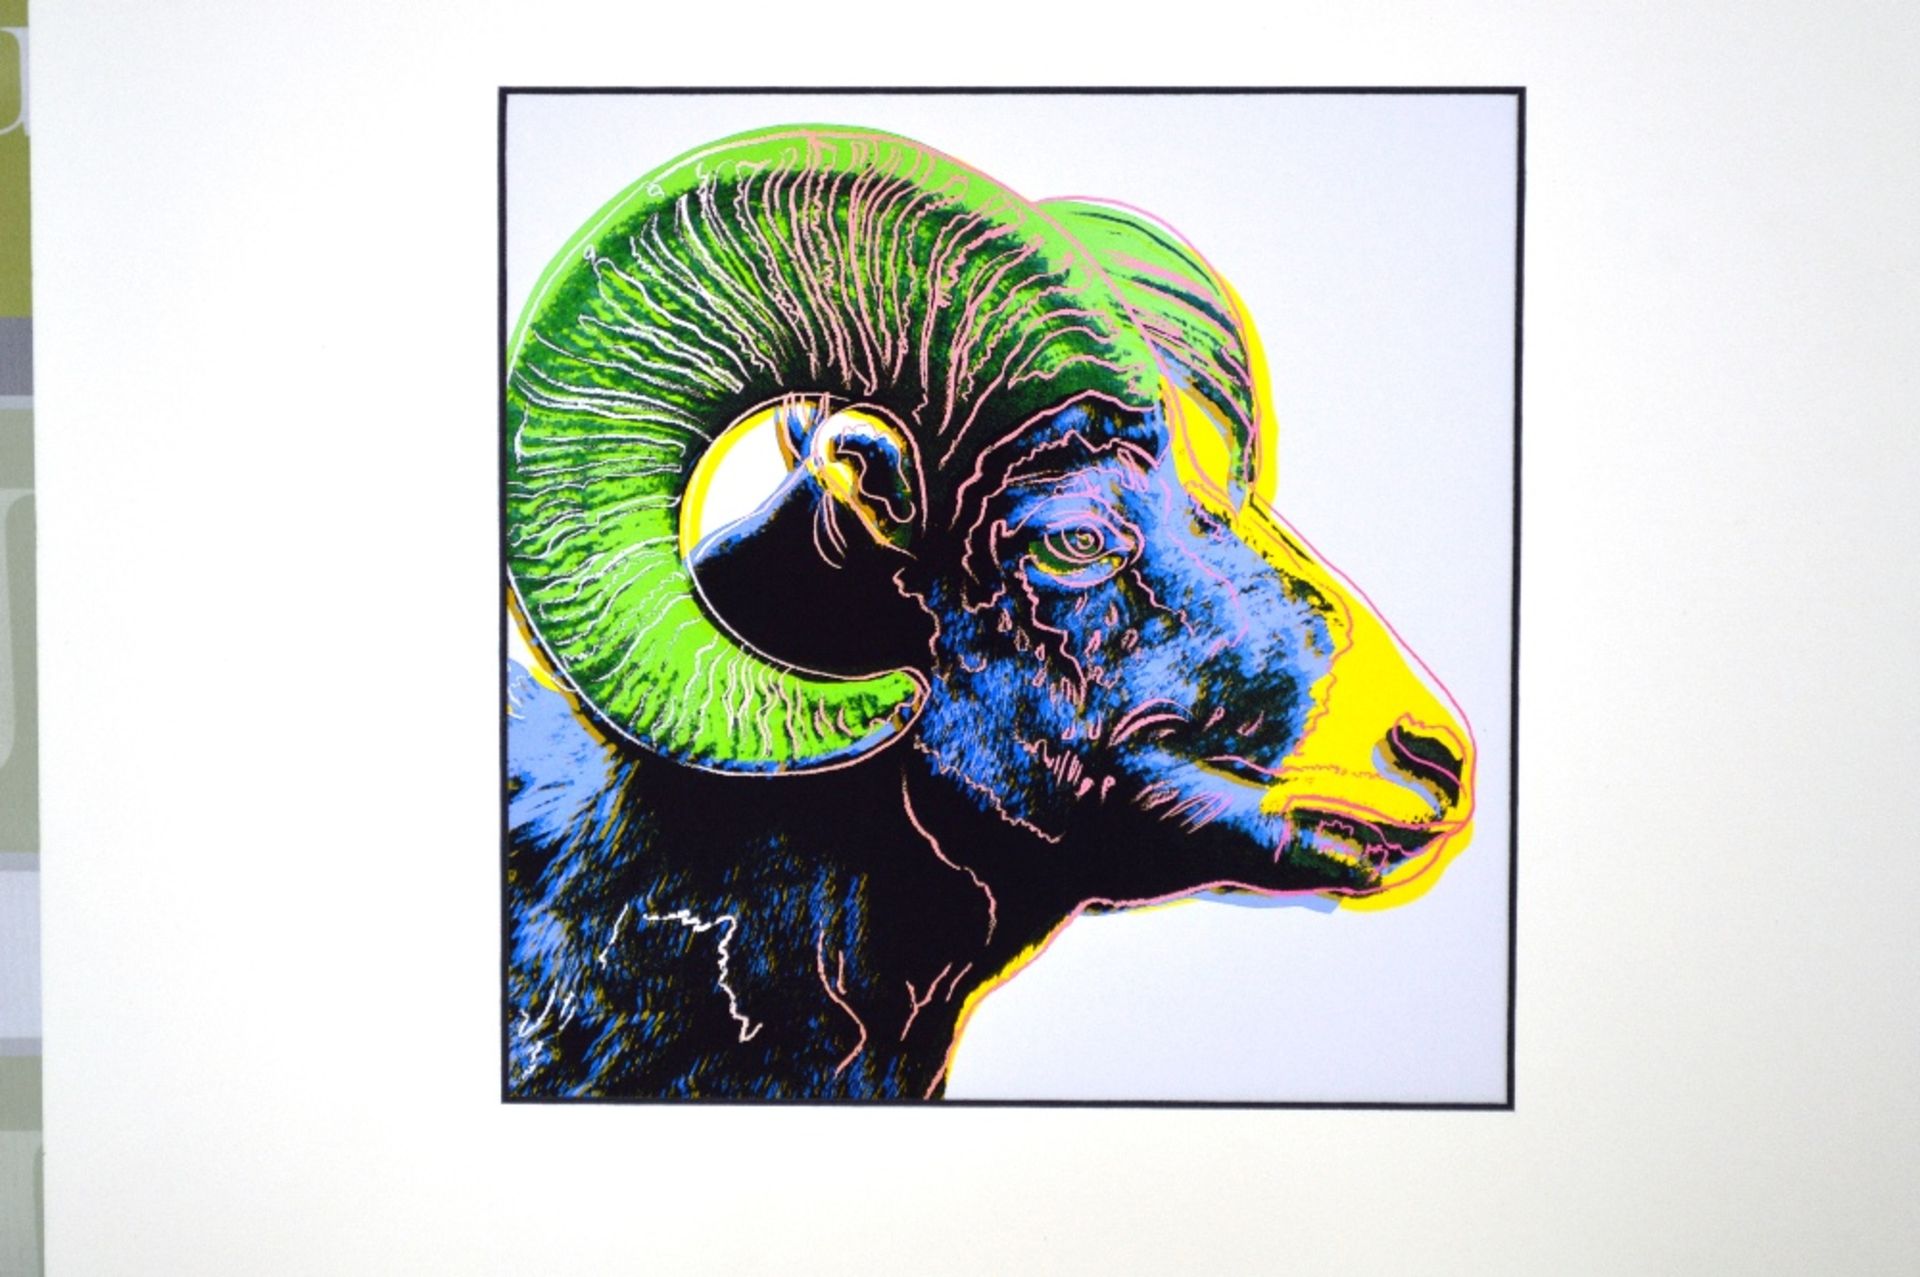 One of only 1000 ltd edition Andy Warhol-1987 -Rams Head serigraph,